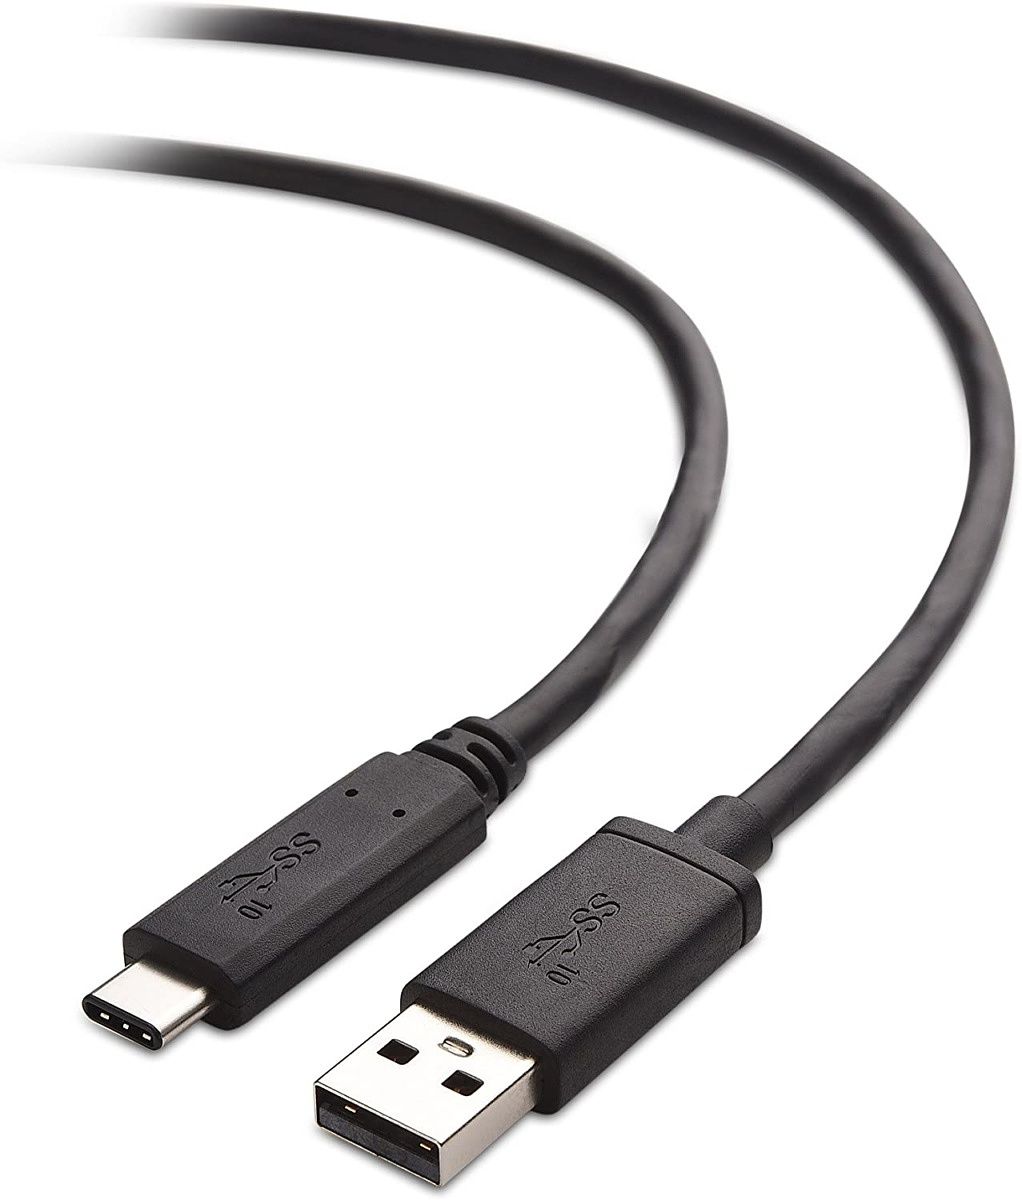 The Cable Matters USB-A to USB-C cable is great for data transfer as it comes with USB SuperSpeed 10Gbps speeds. It also supports up to 15W charging.